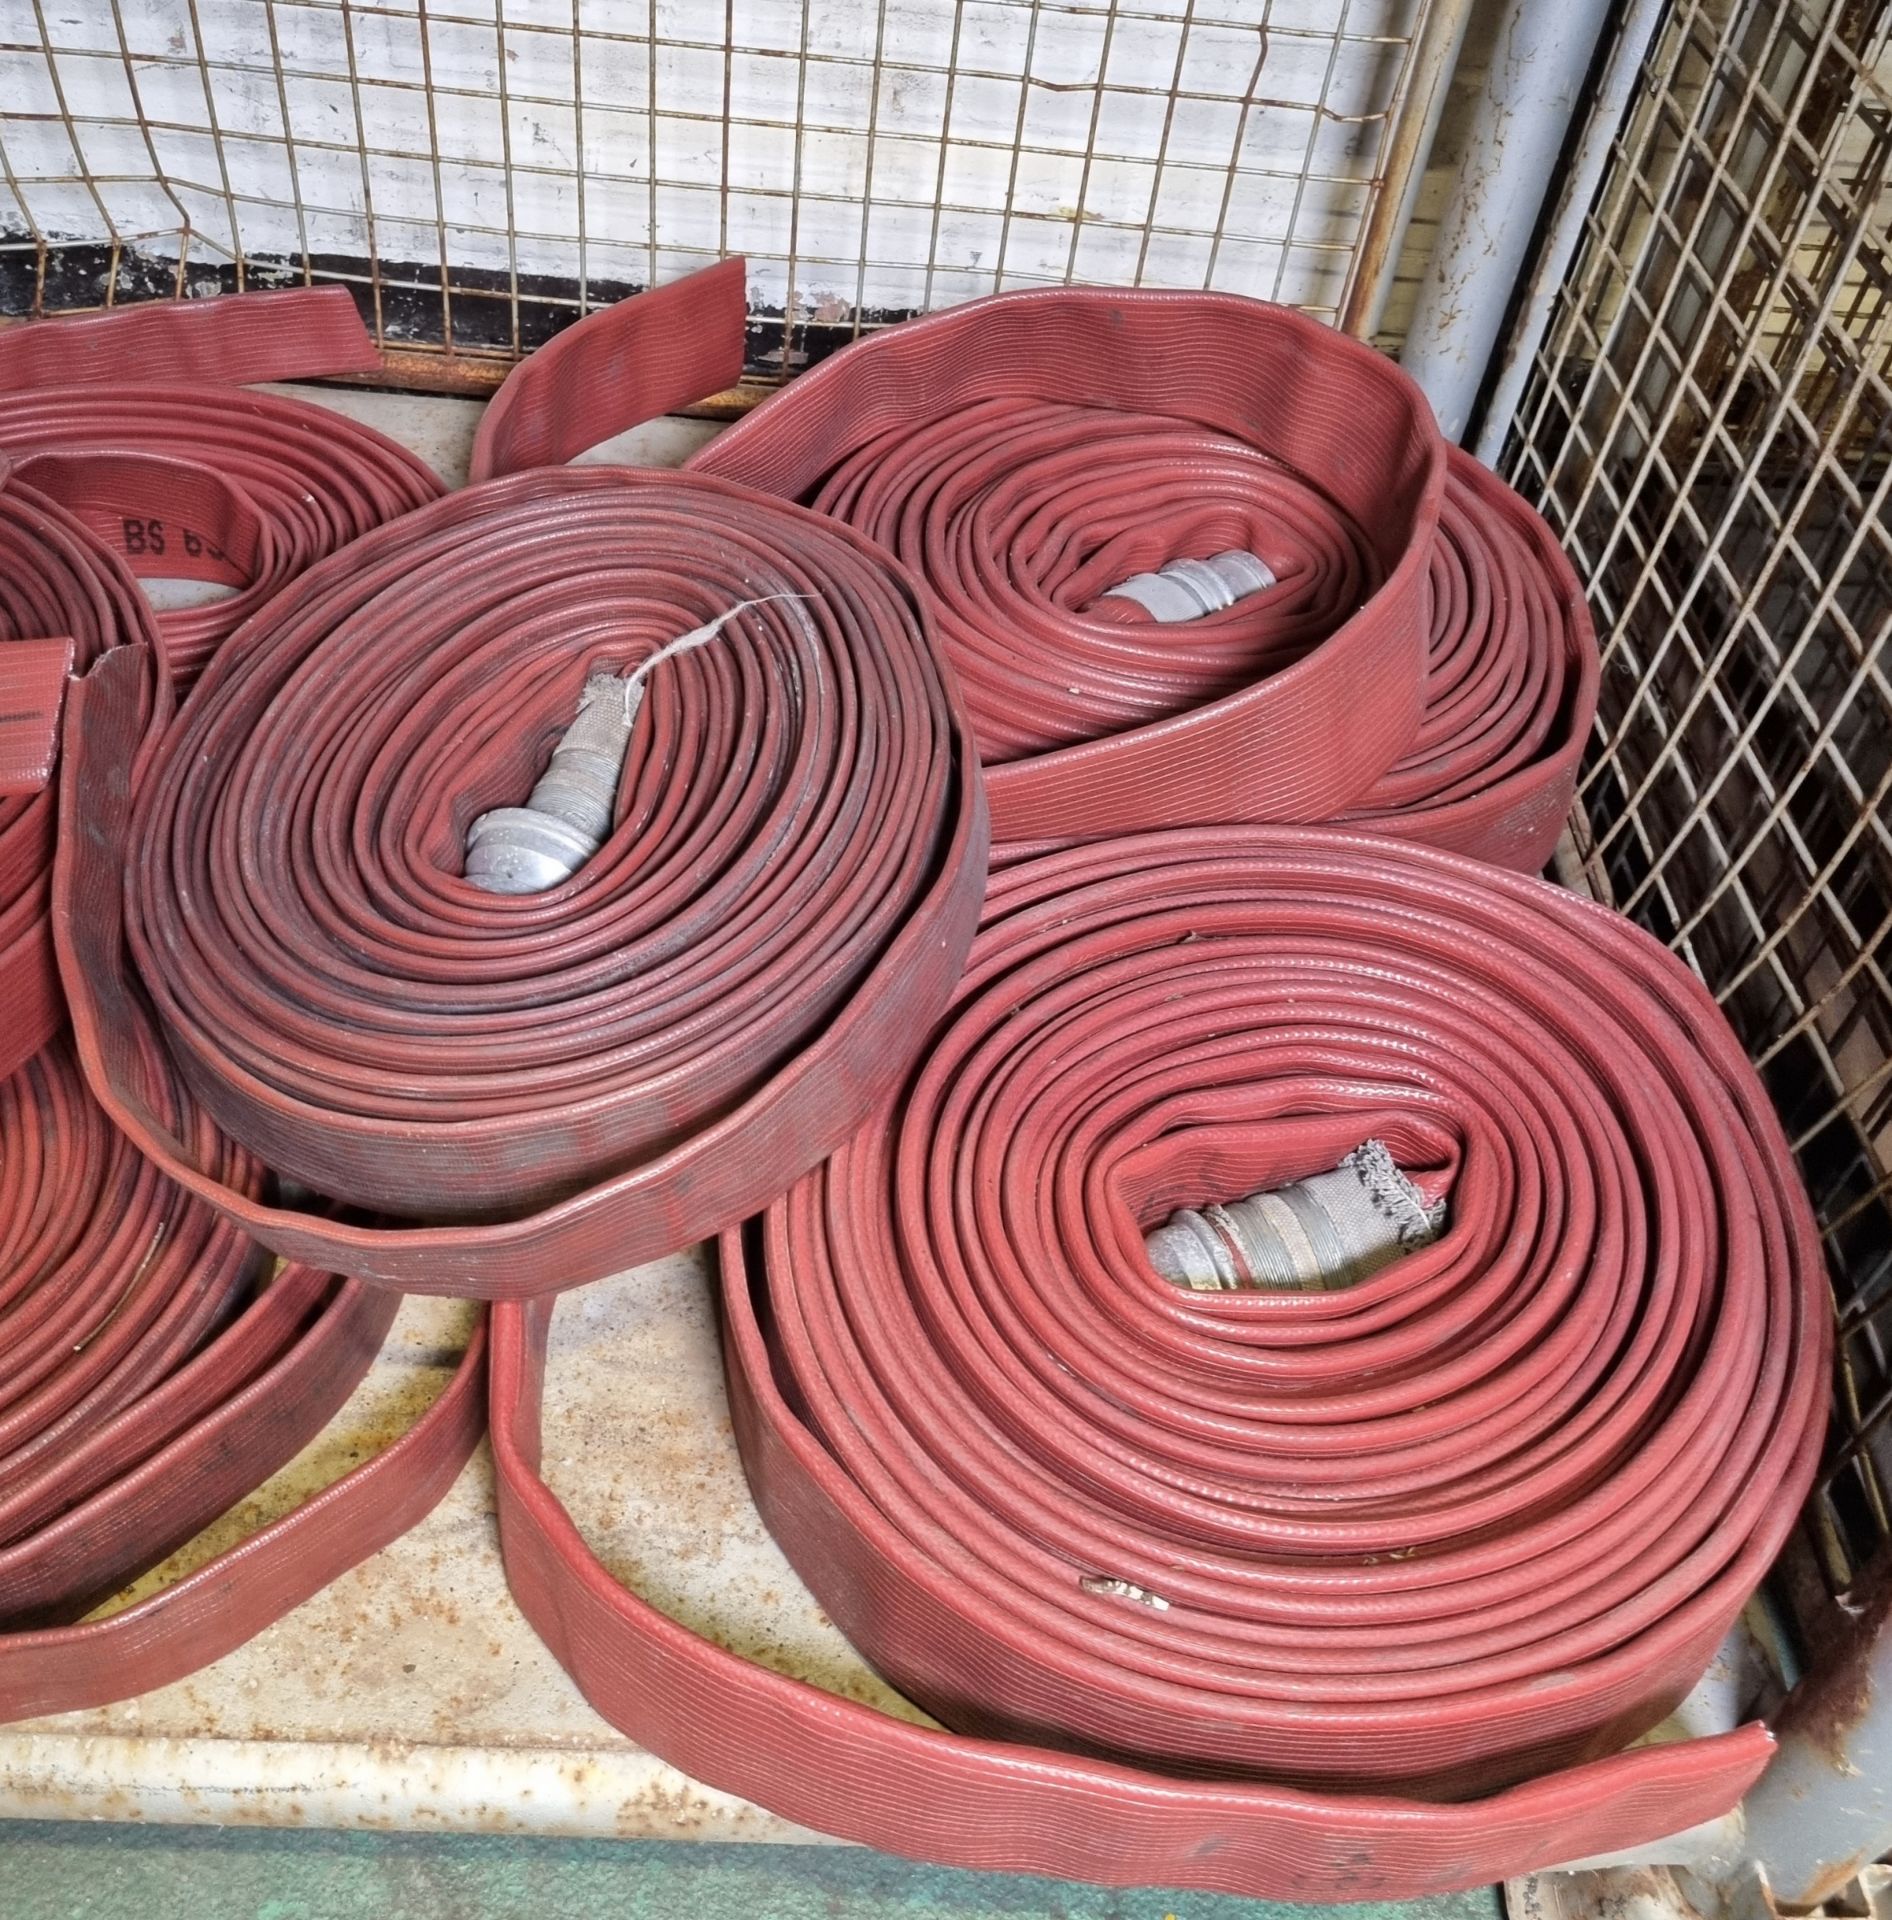 6x Layflat fire hose, mixed sizes, approx length 20m, some missing couplings - Image 2 of 3